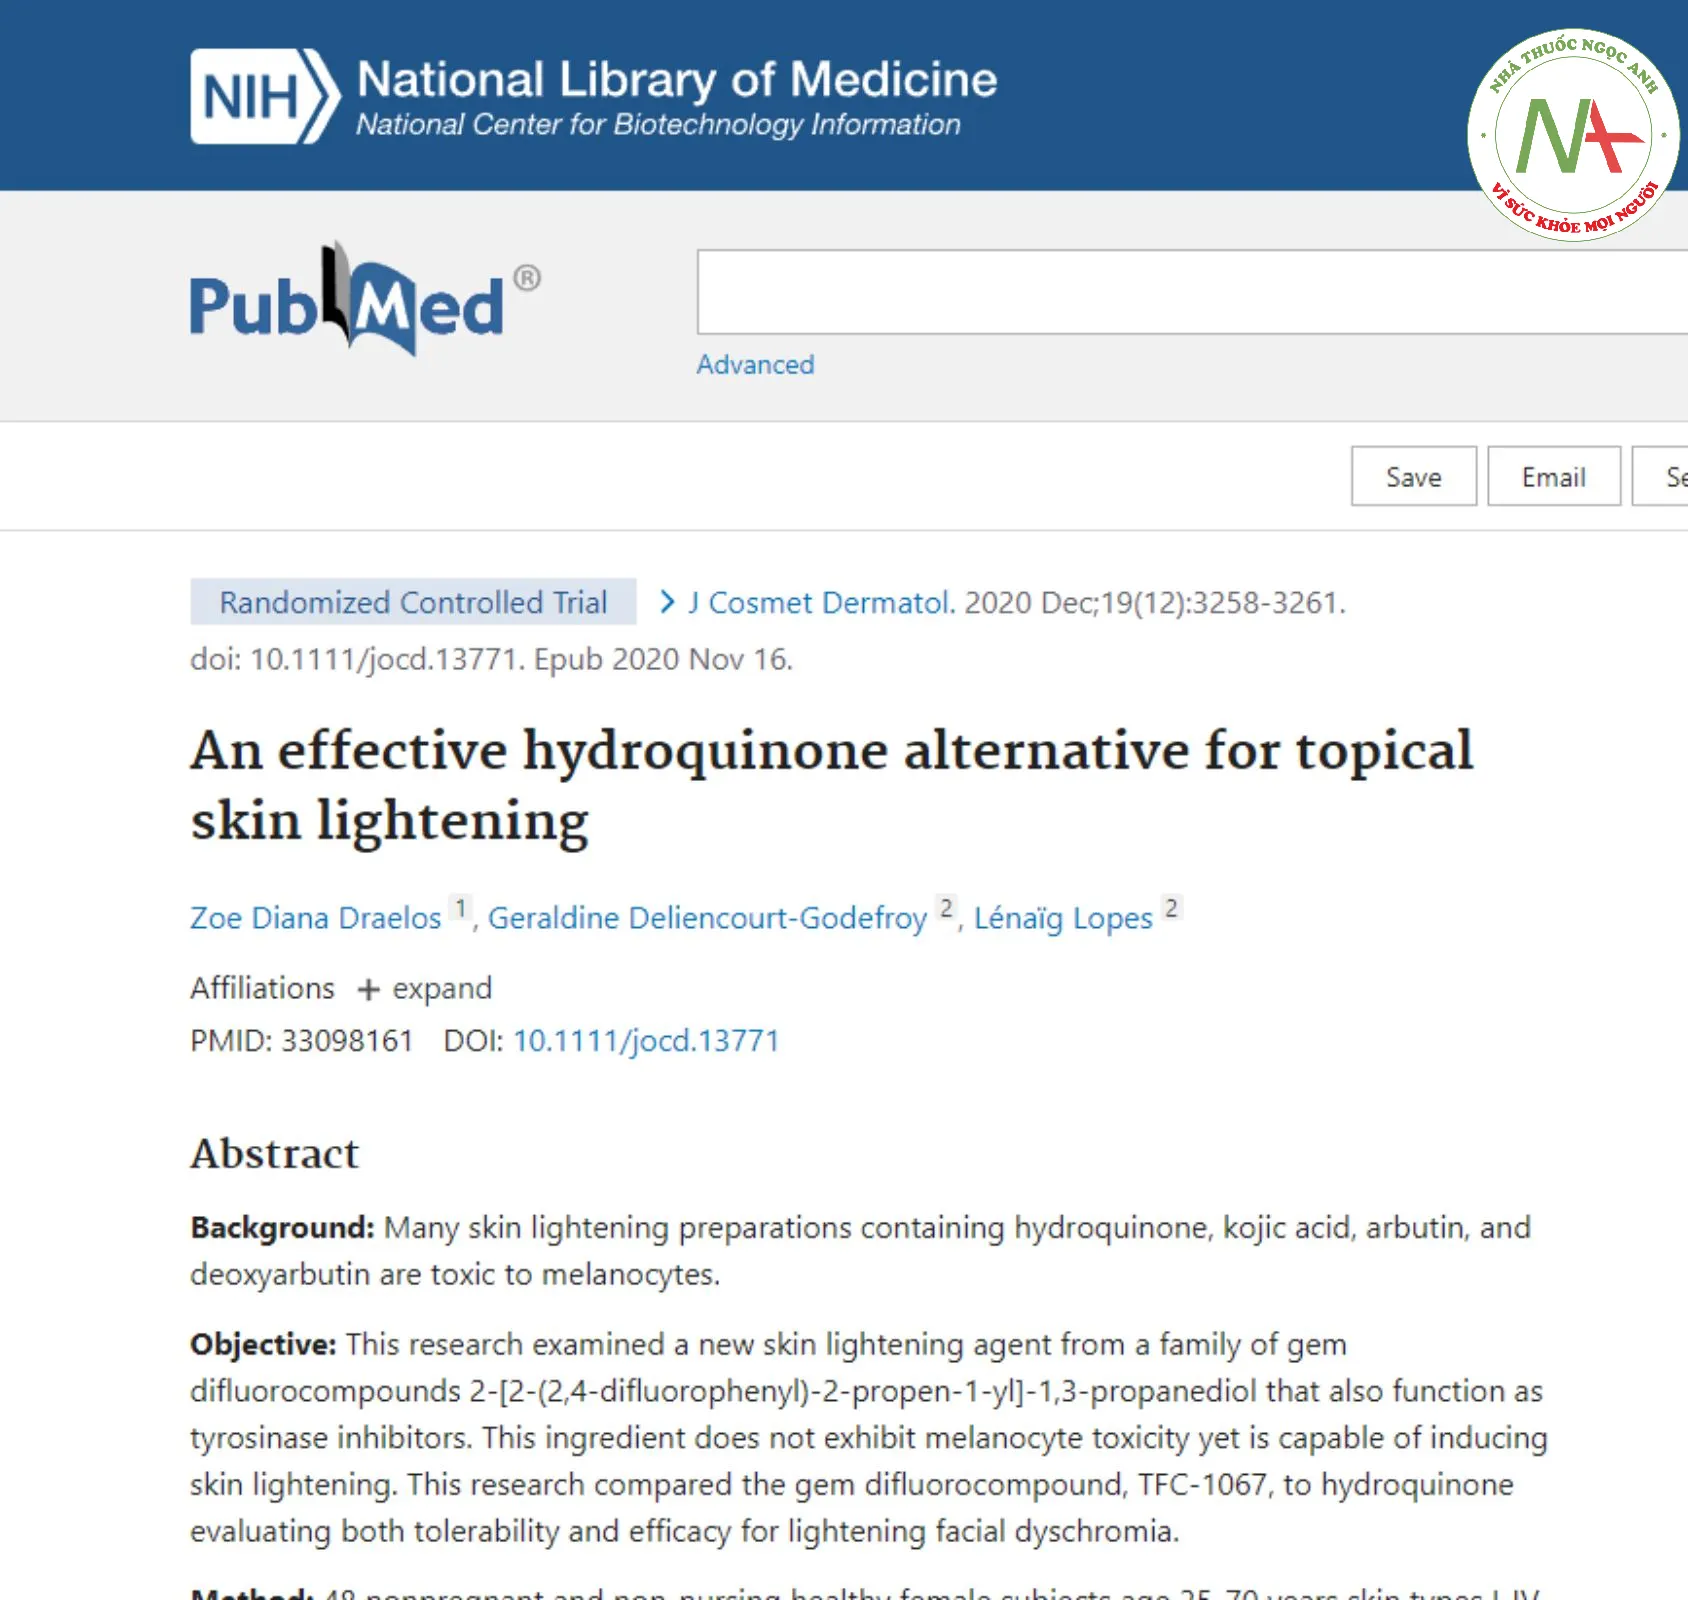 An effective hydroquinone alternative for topical skin lightening